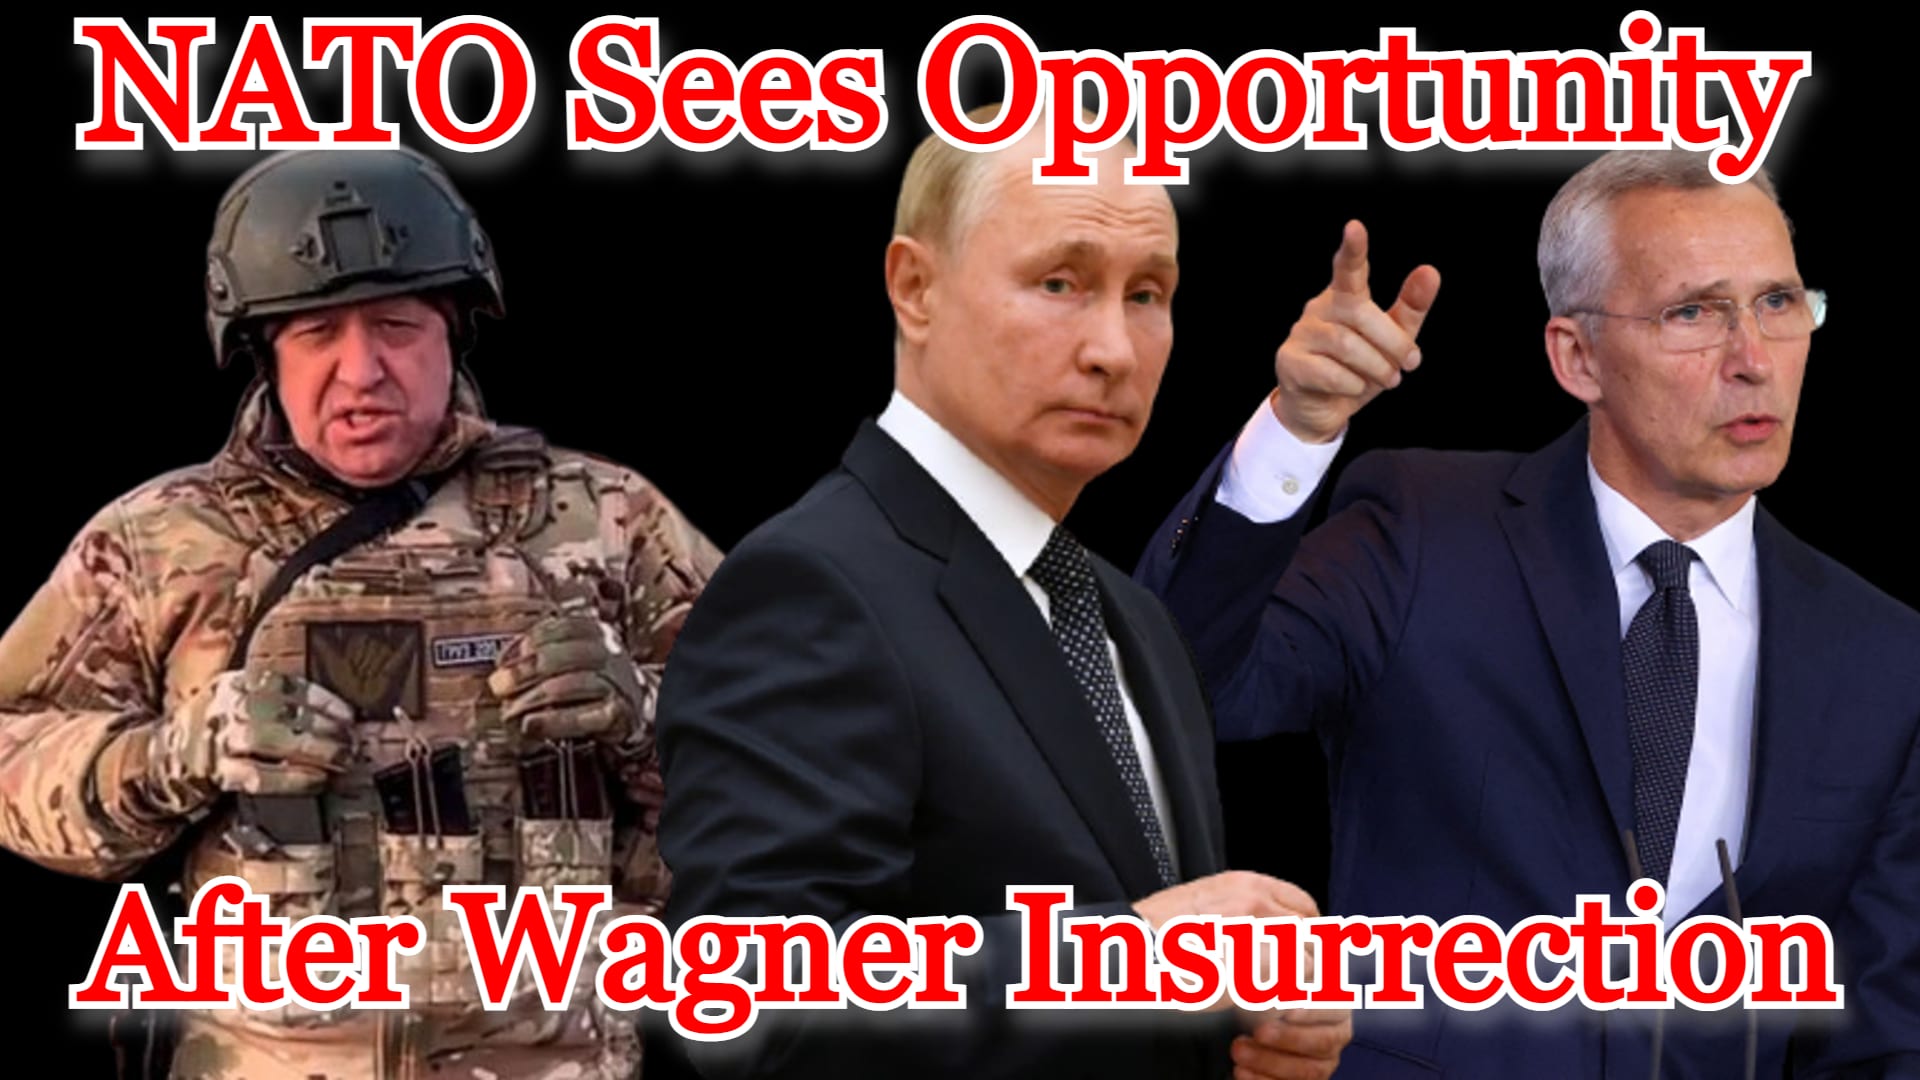 COI #439: NATO Sees Opportunity After Wagner Insurrection